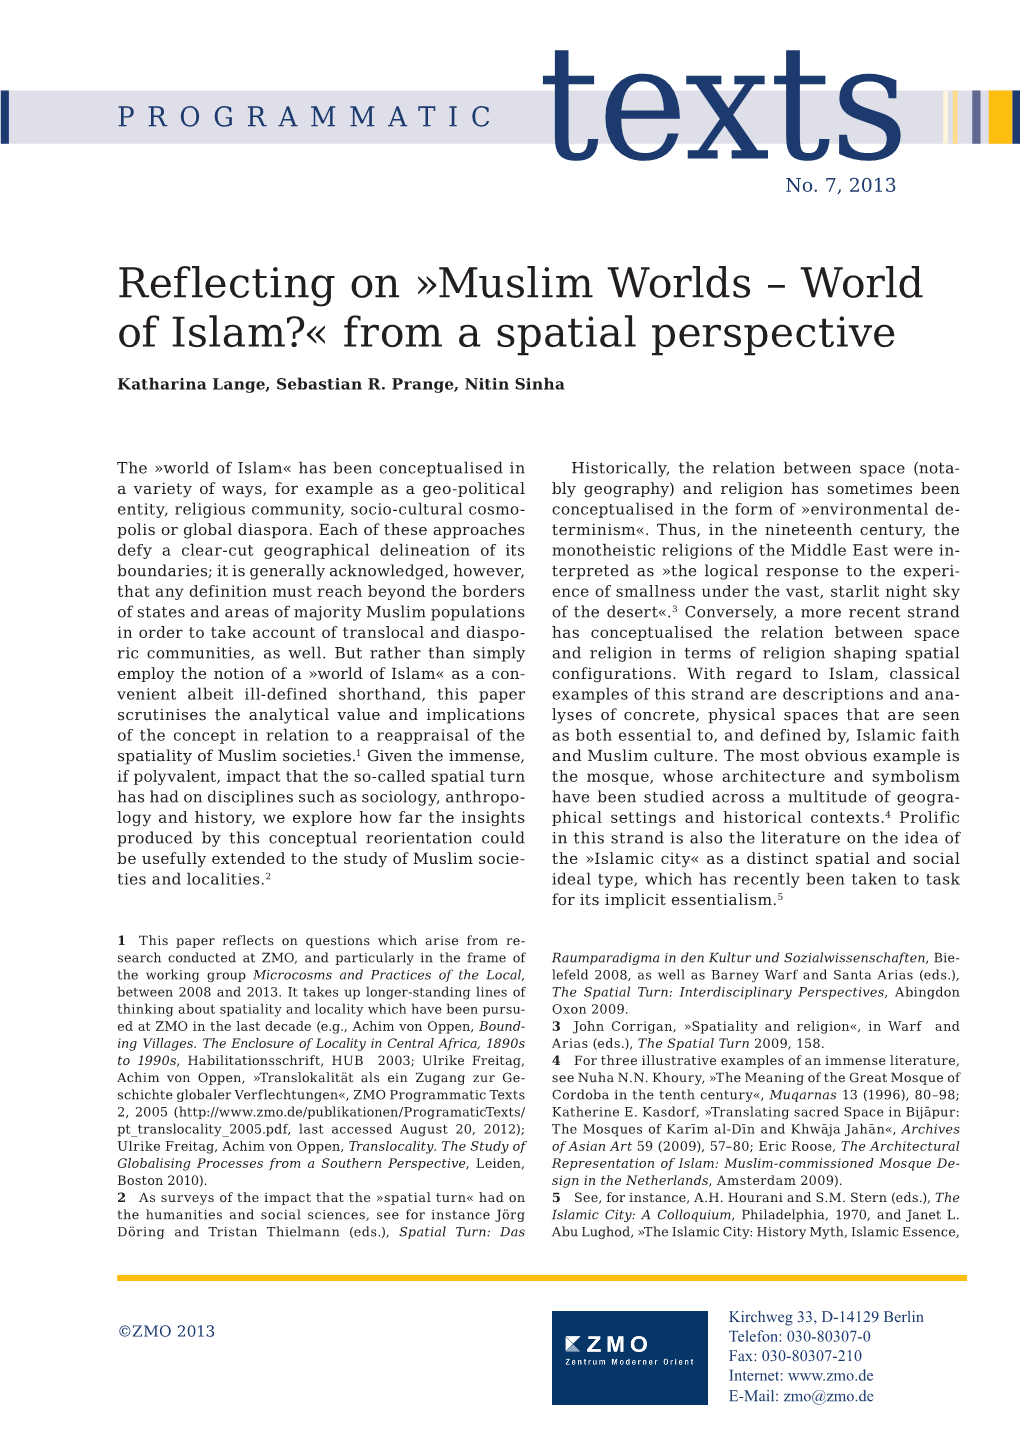 Reflecting on »Muslim Worlds – World of Islam?« from a Spatial Perspective